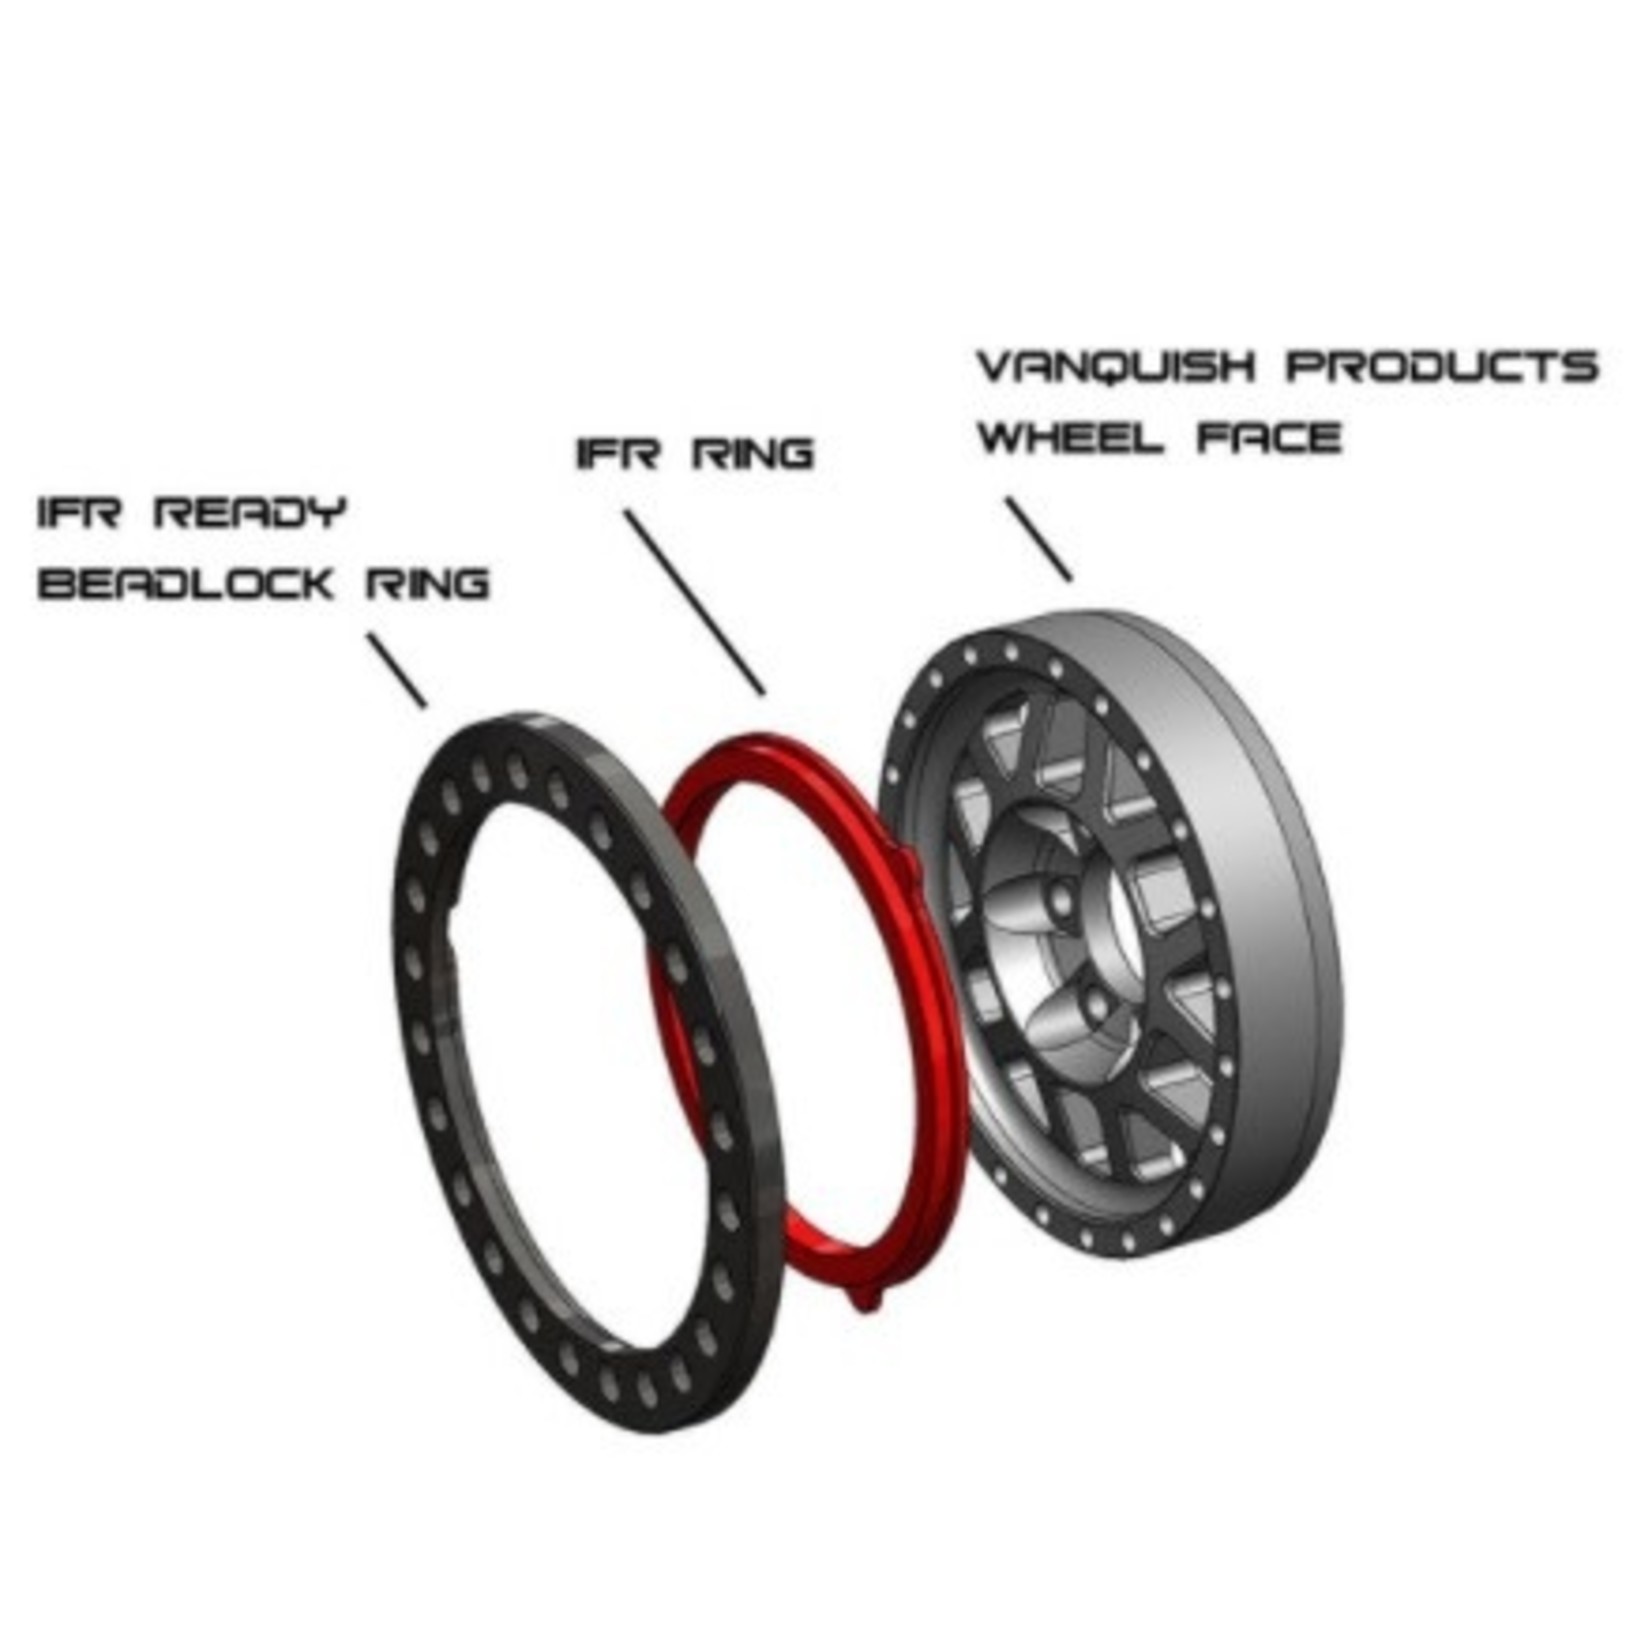 Vanquish Products Vanquish Products 1.9" Omni IFR Inner Ring (Black) #VPS05460